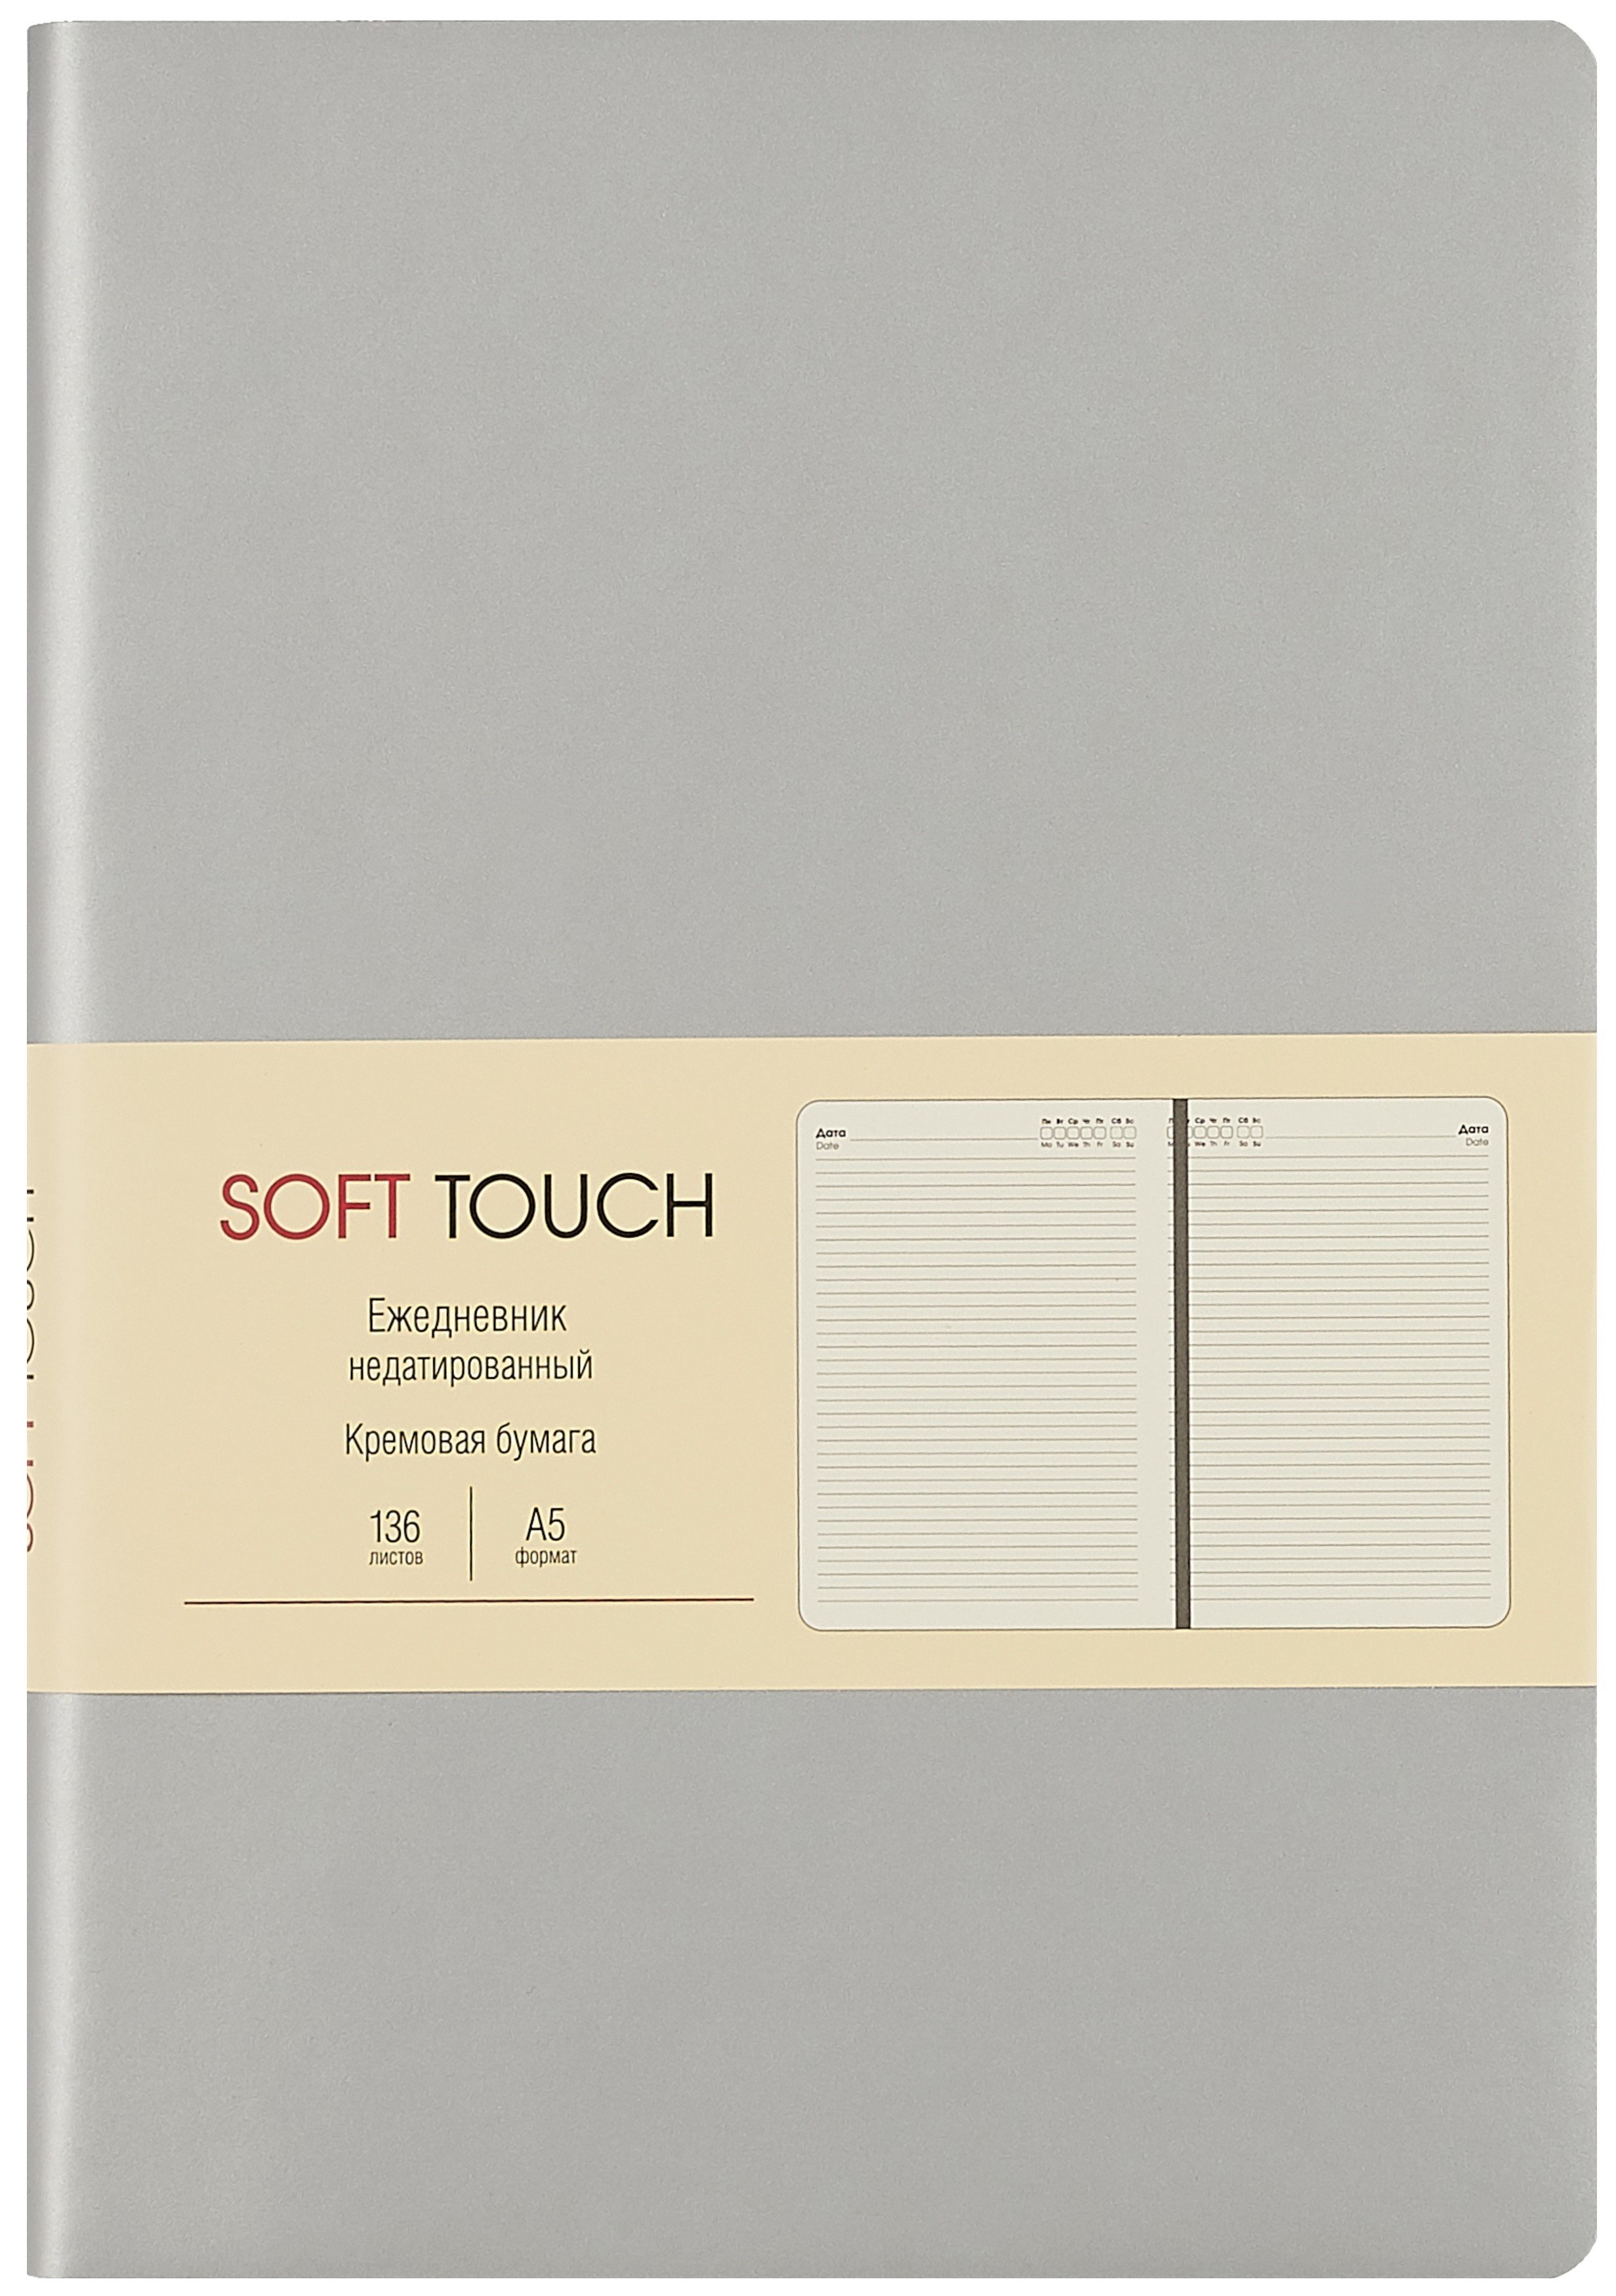  . 5 136  SOFT TOUCH  , .., ., ., ., ., 